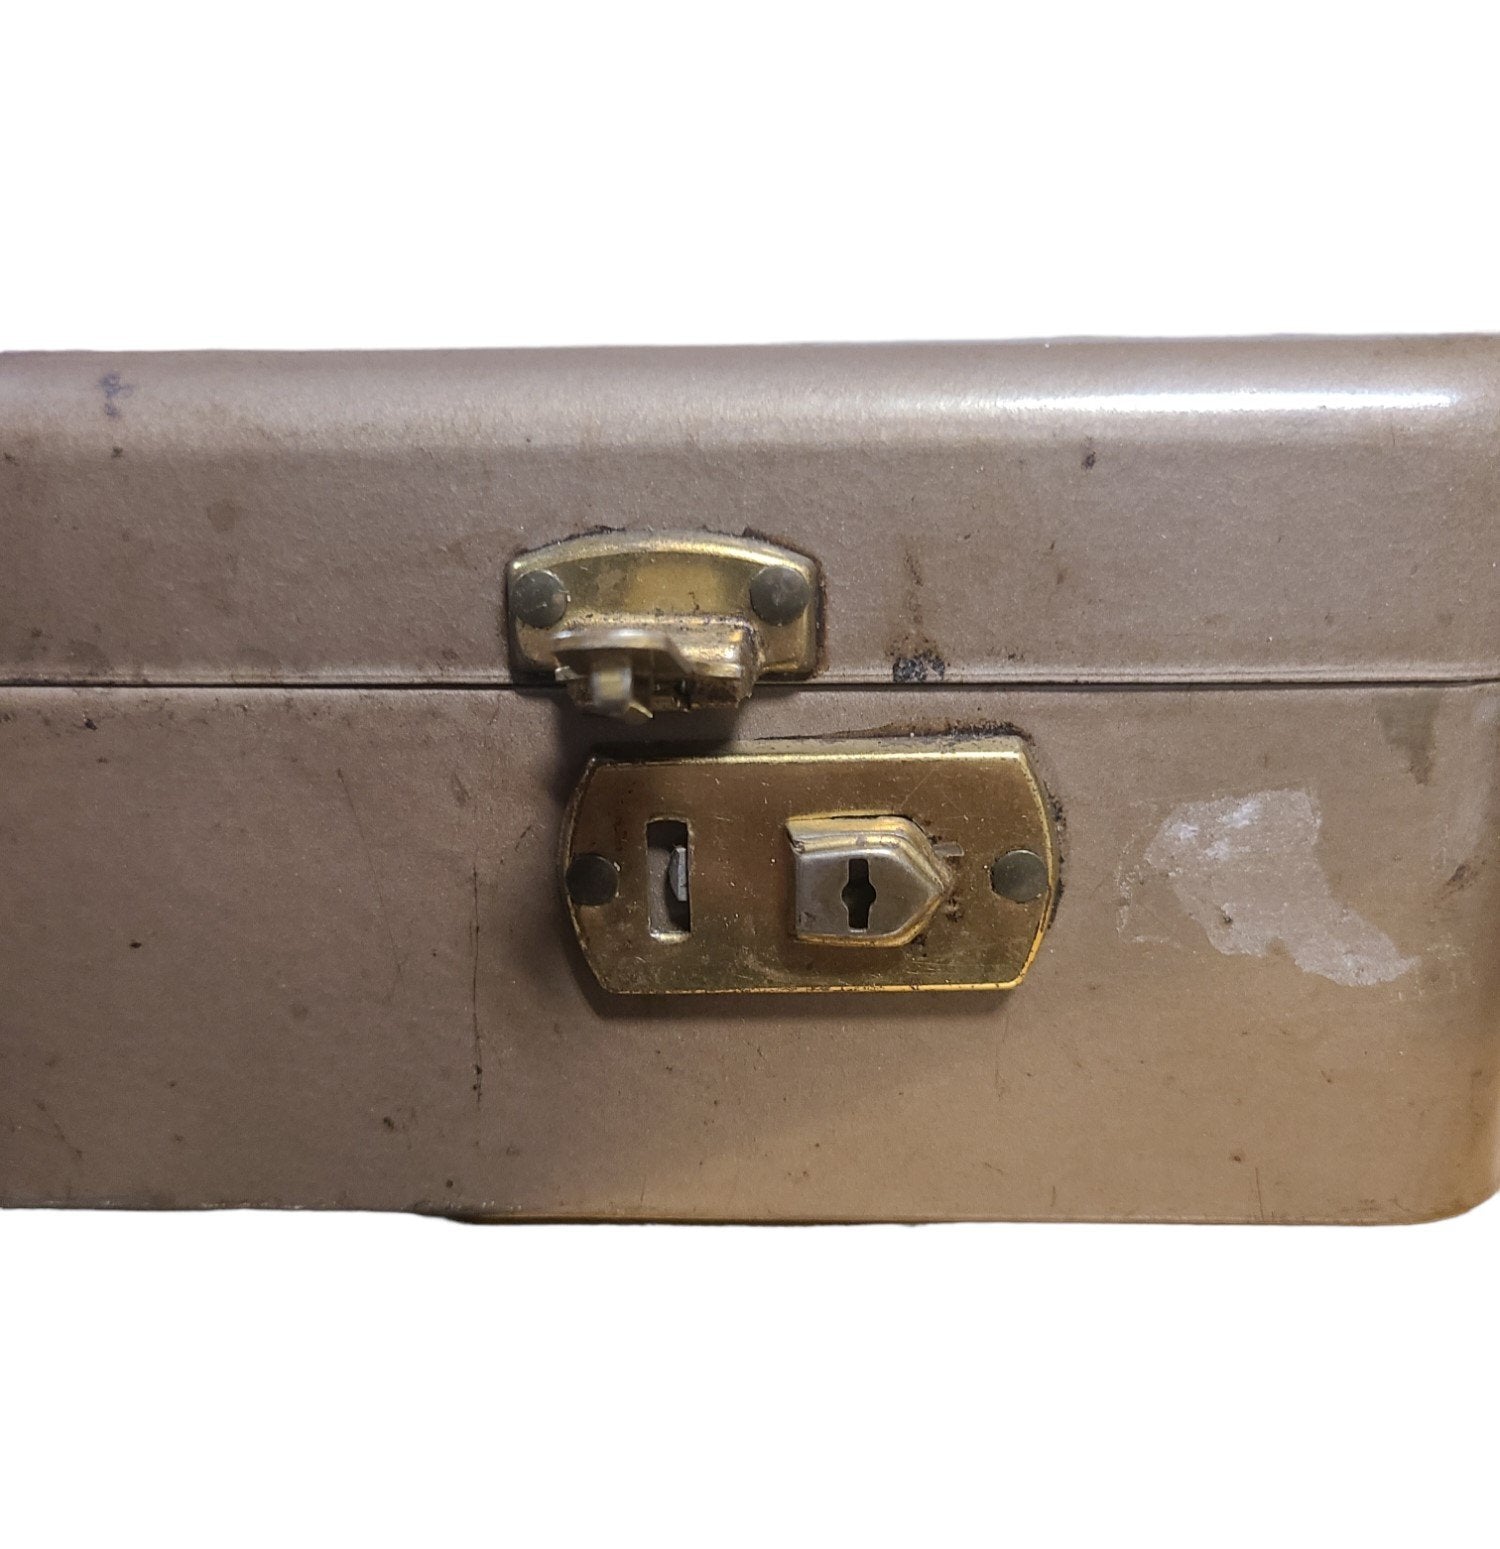 Vintage Metal Bank Box with Clasp and Lock Organization Safe Keeping Storage